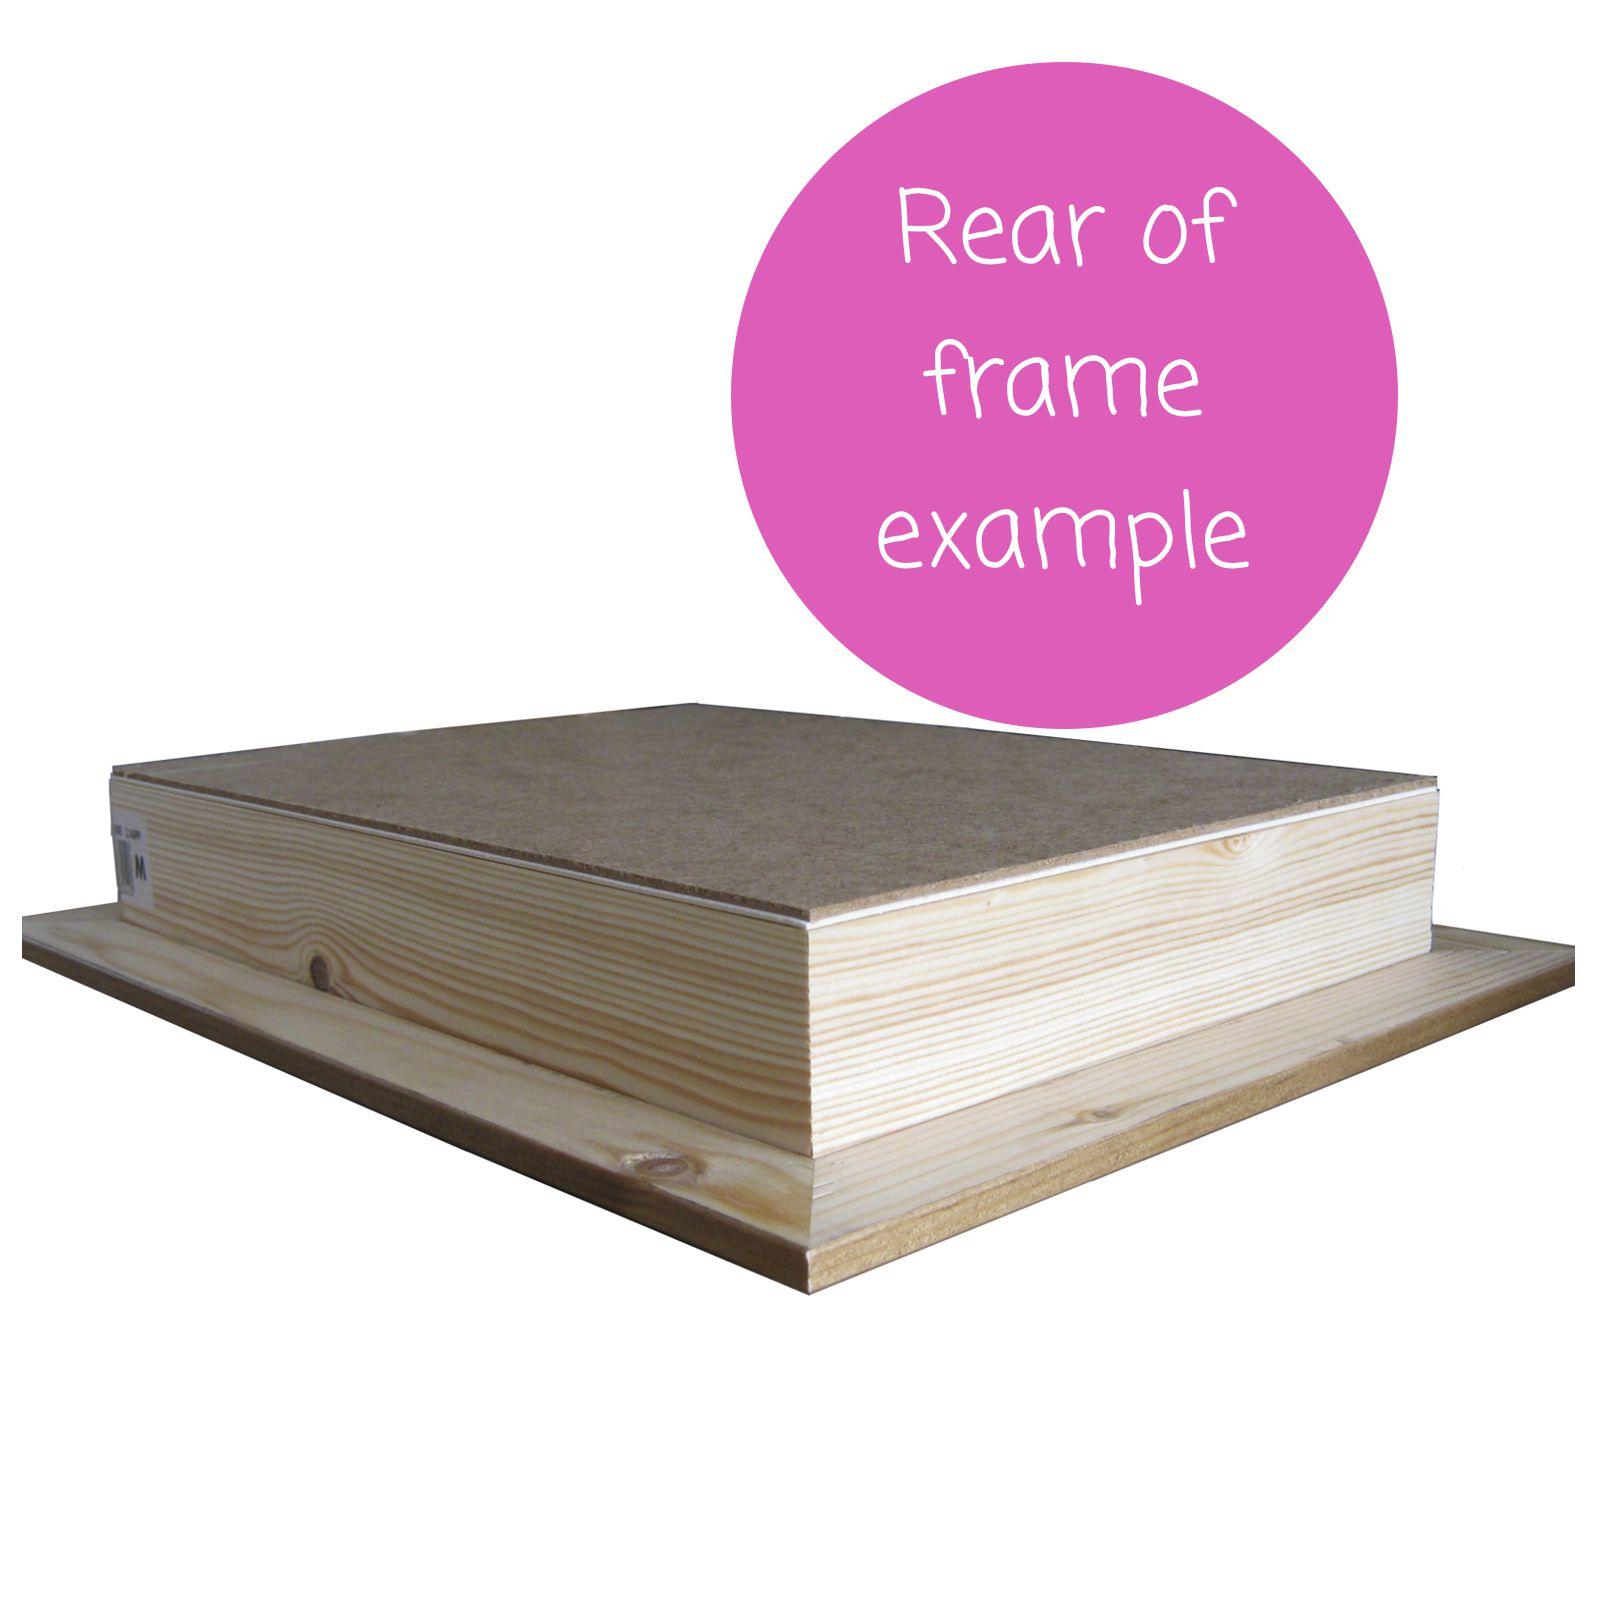 example of rear pine box